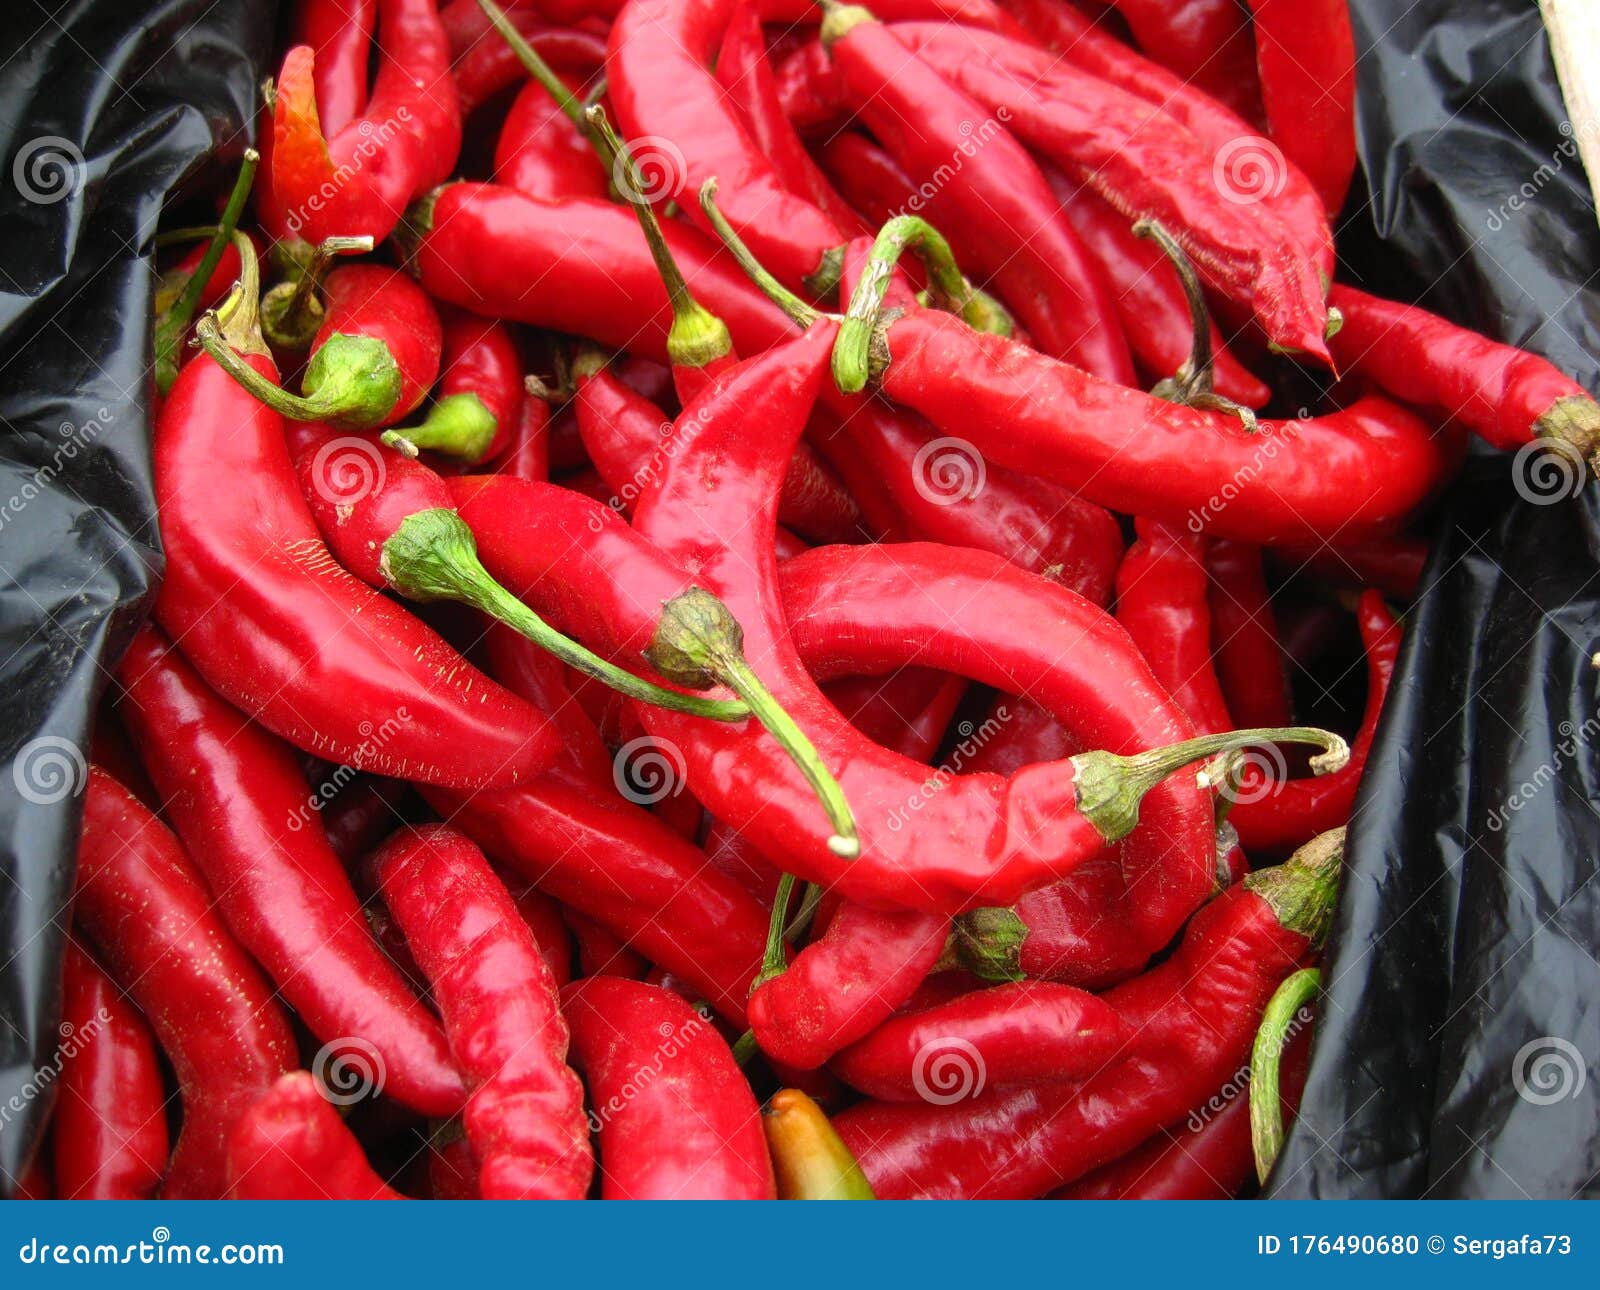 red chilli background, in the market